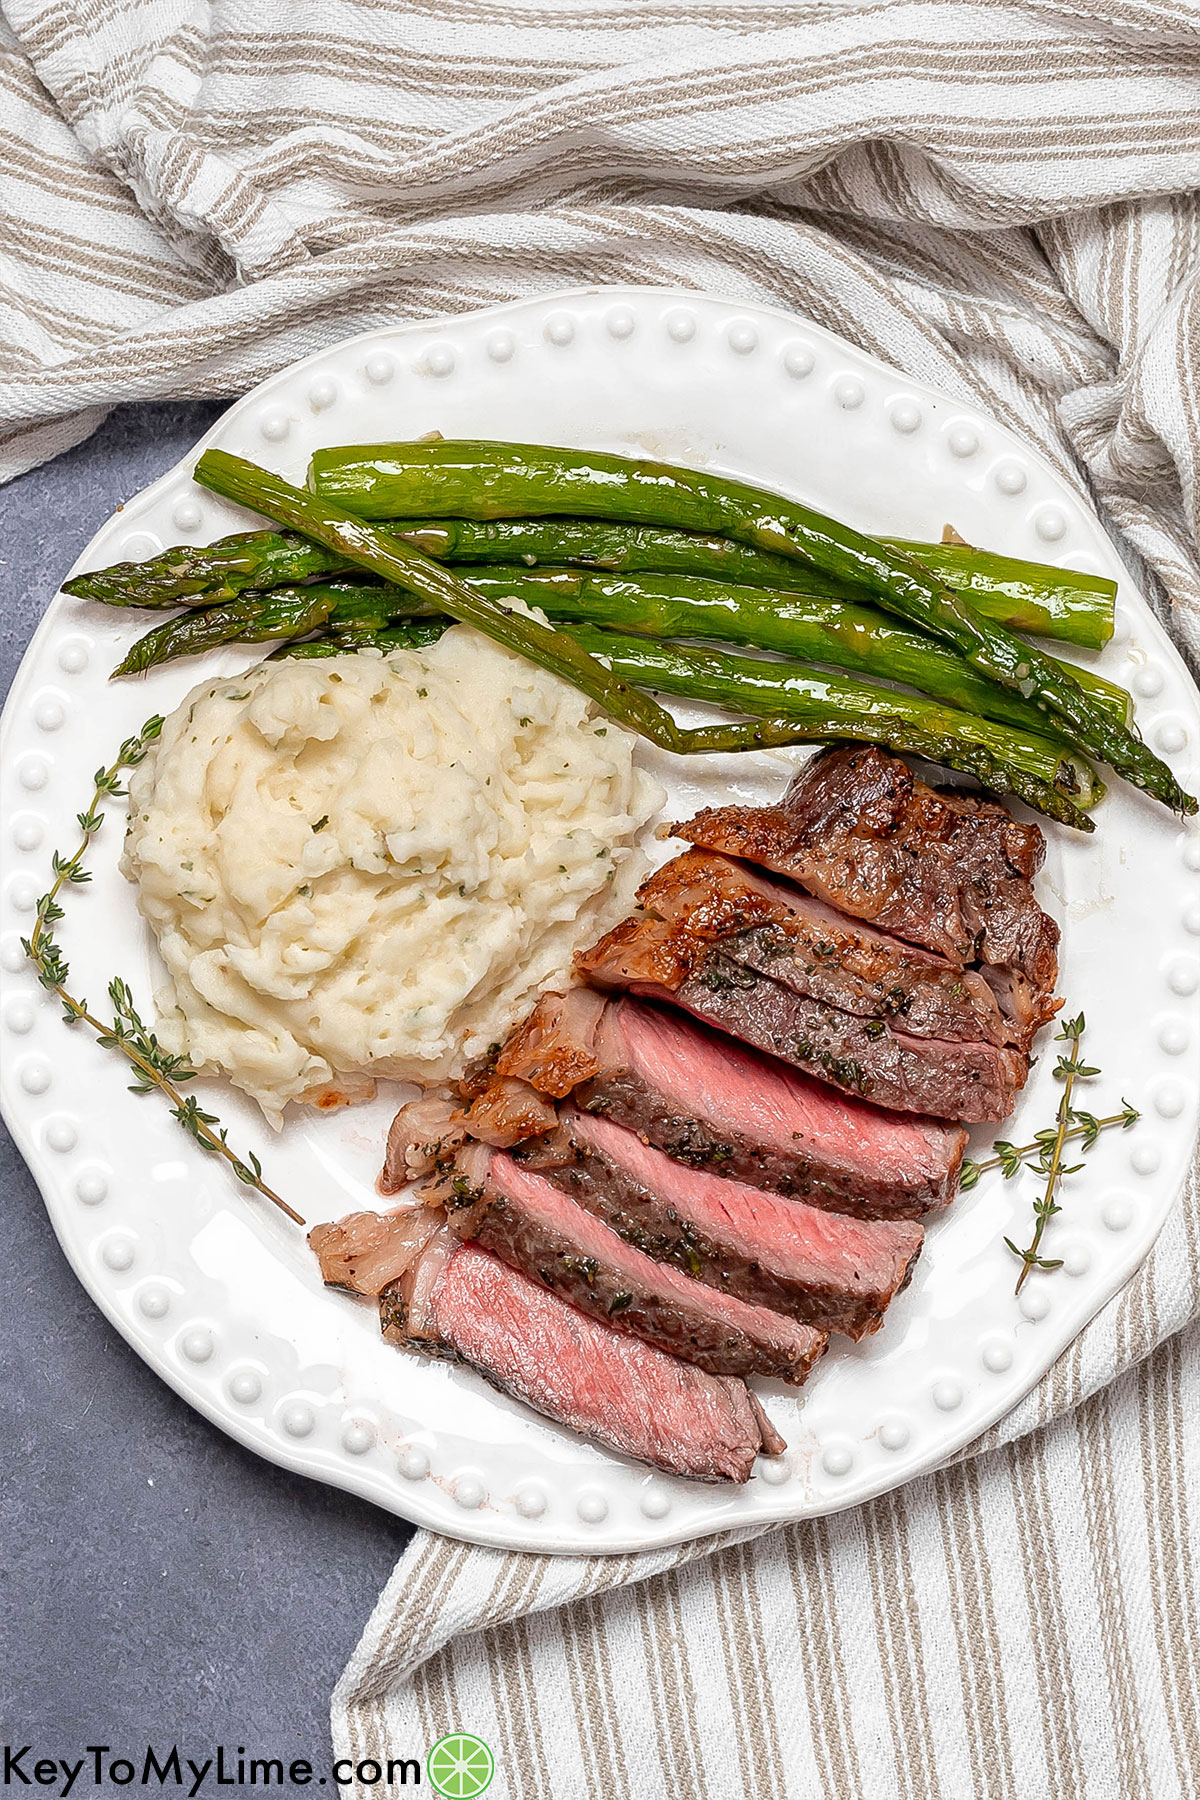 Juicy tender sliced steak plated with freshly cooked asparagus and potatoes with a napkin in the background.